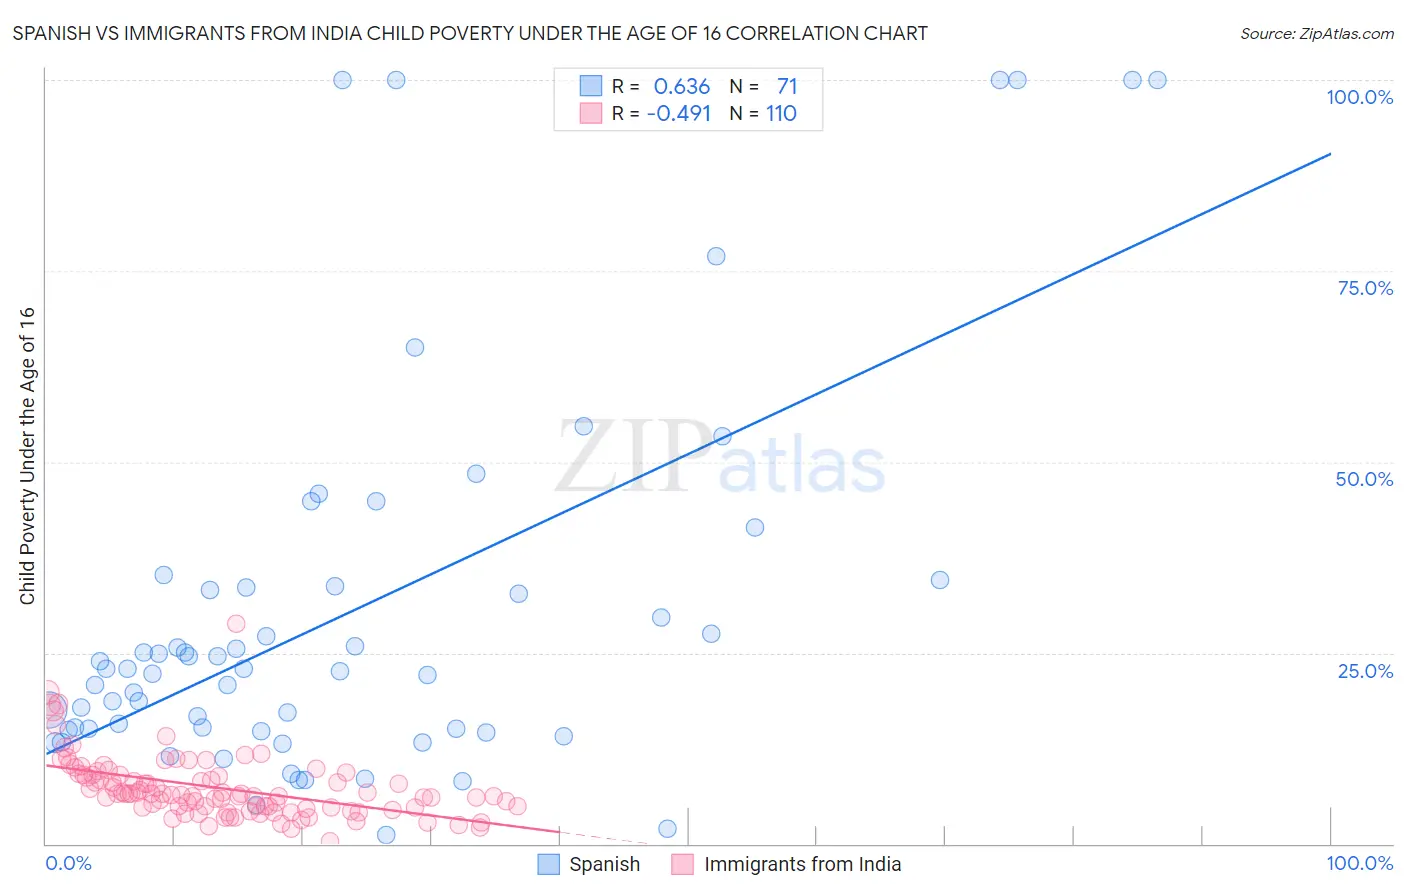 Spanish vs Immigrants from India Child Poverty Under the Age of 16